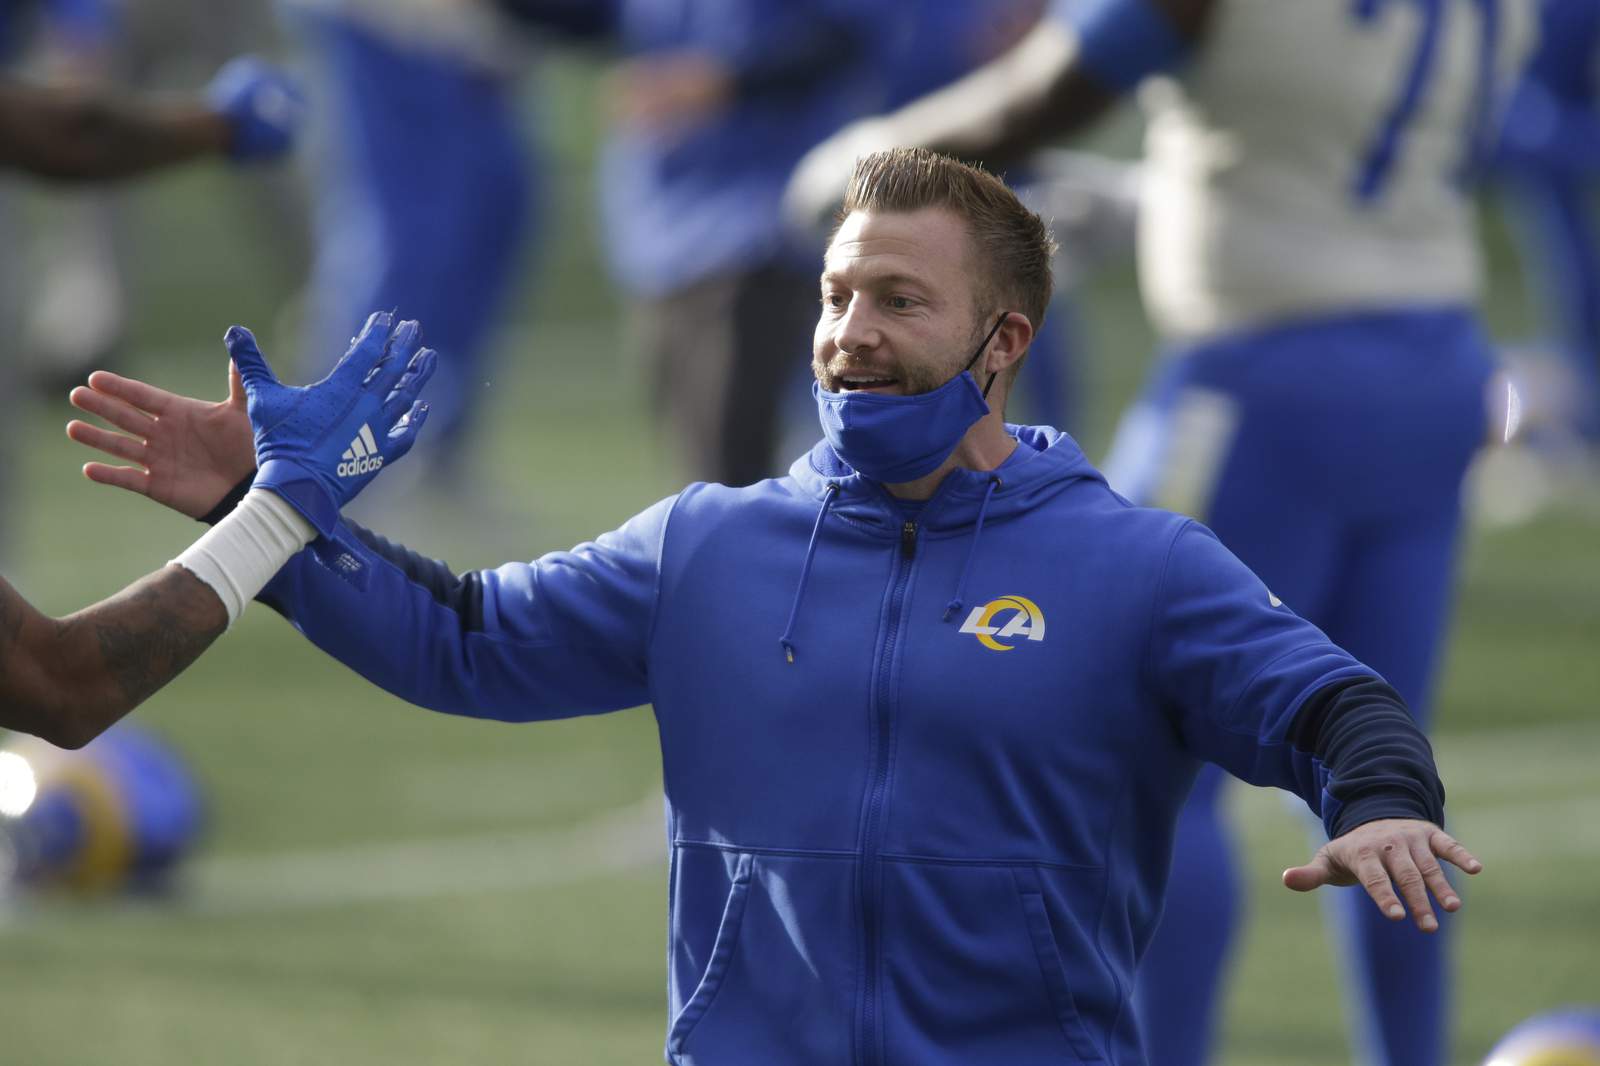 Friends as playoff foes: Packers' LaFleur faces Rams' McVay